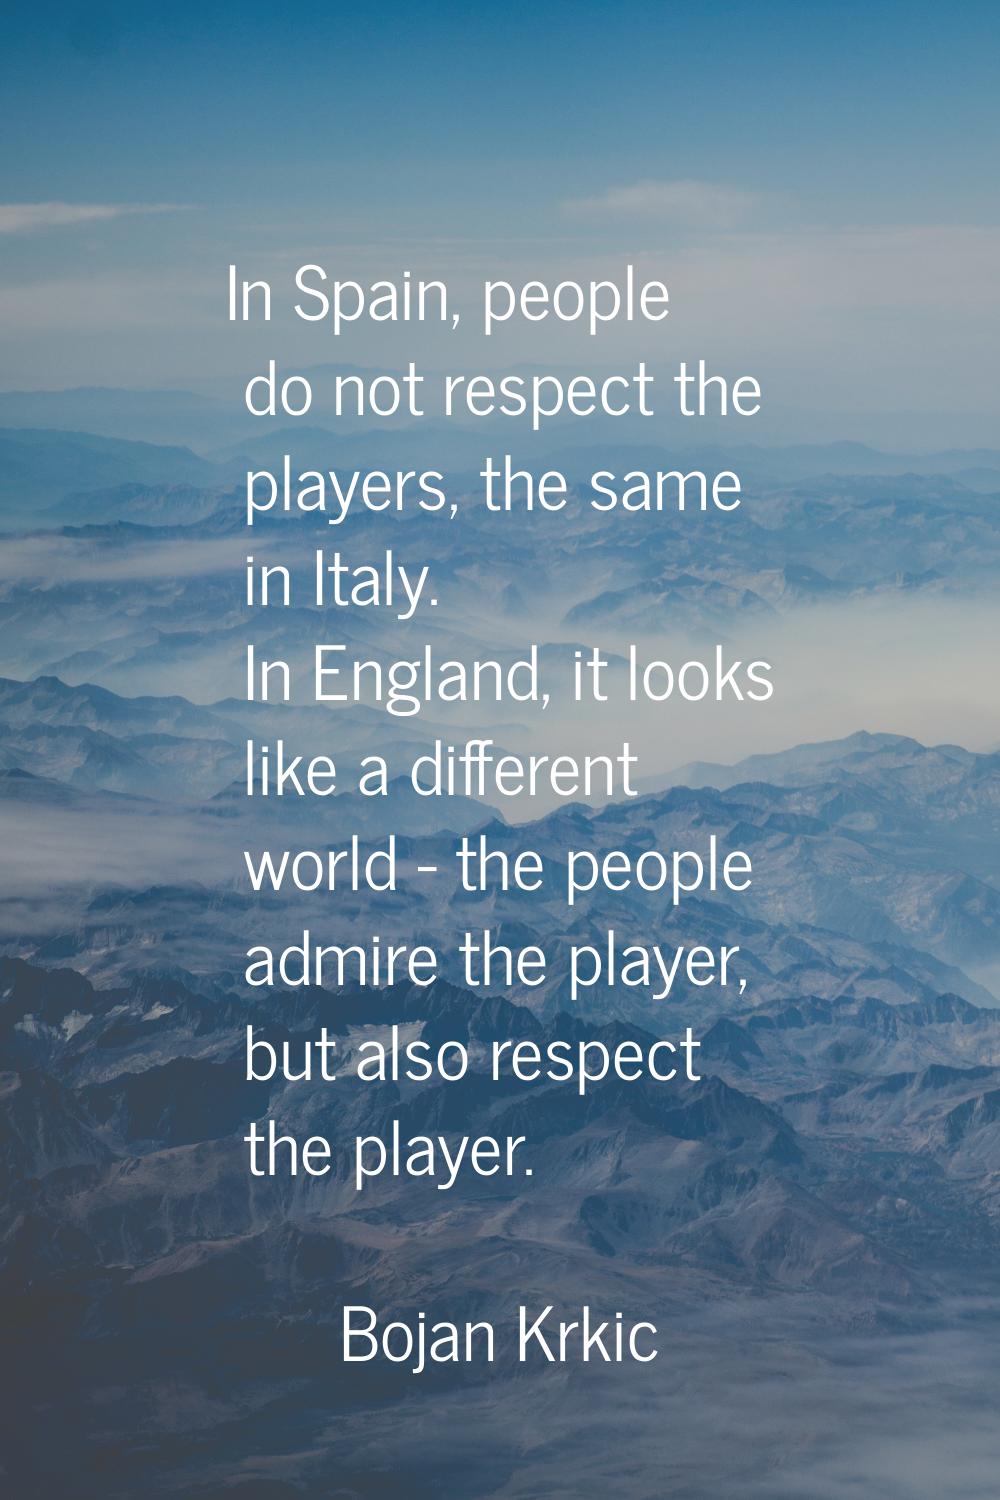 In Spain, people do not respect the players, the same in Italy. In England, it looks like a differe